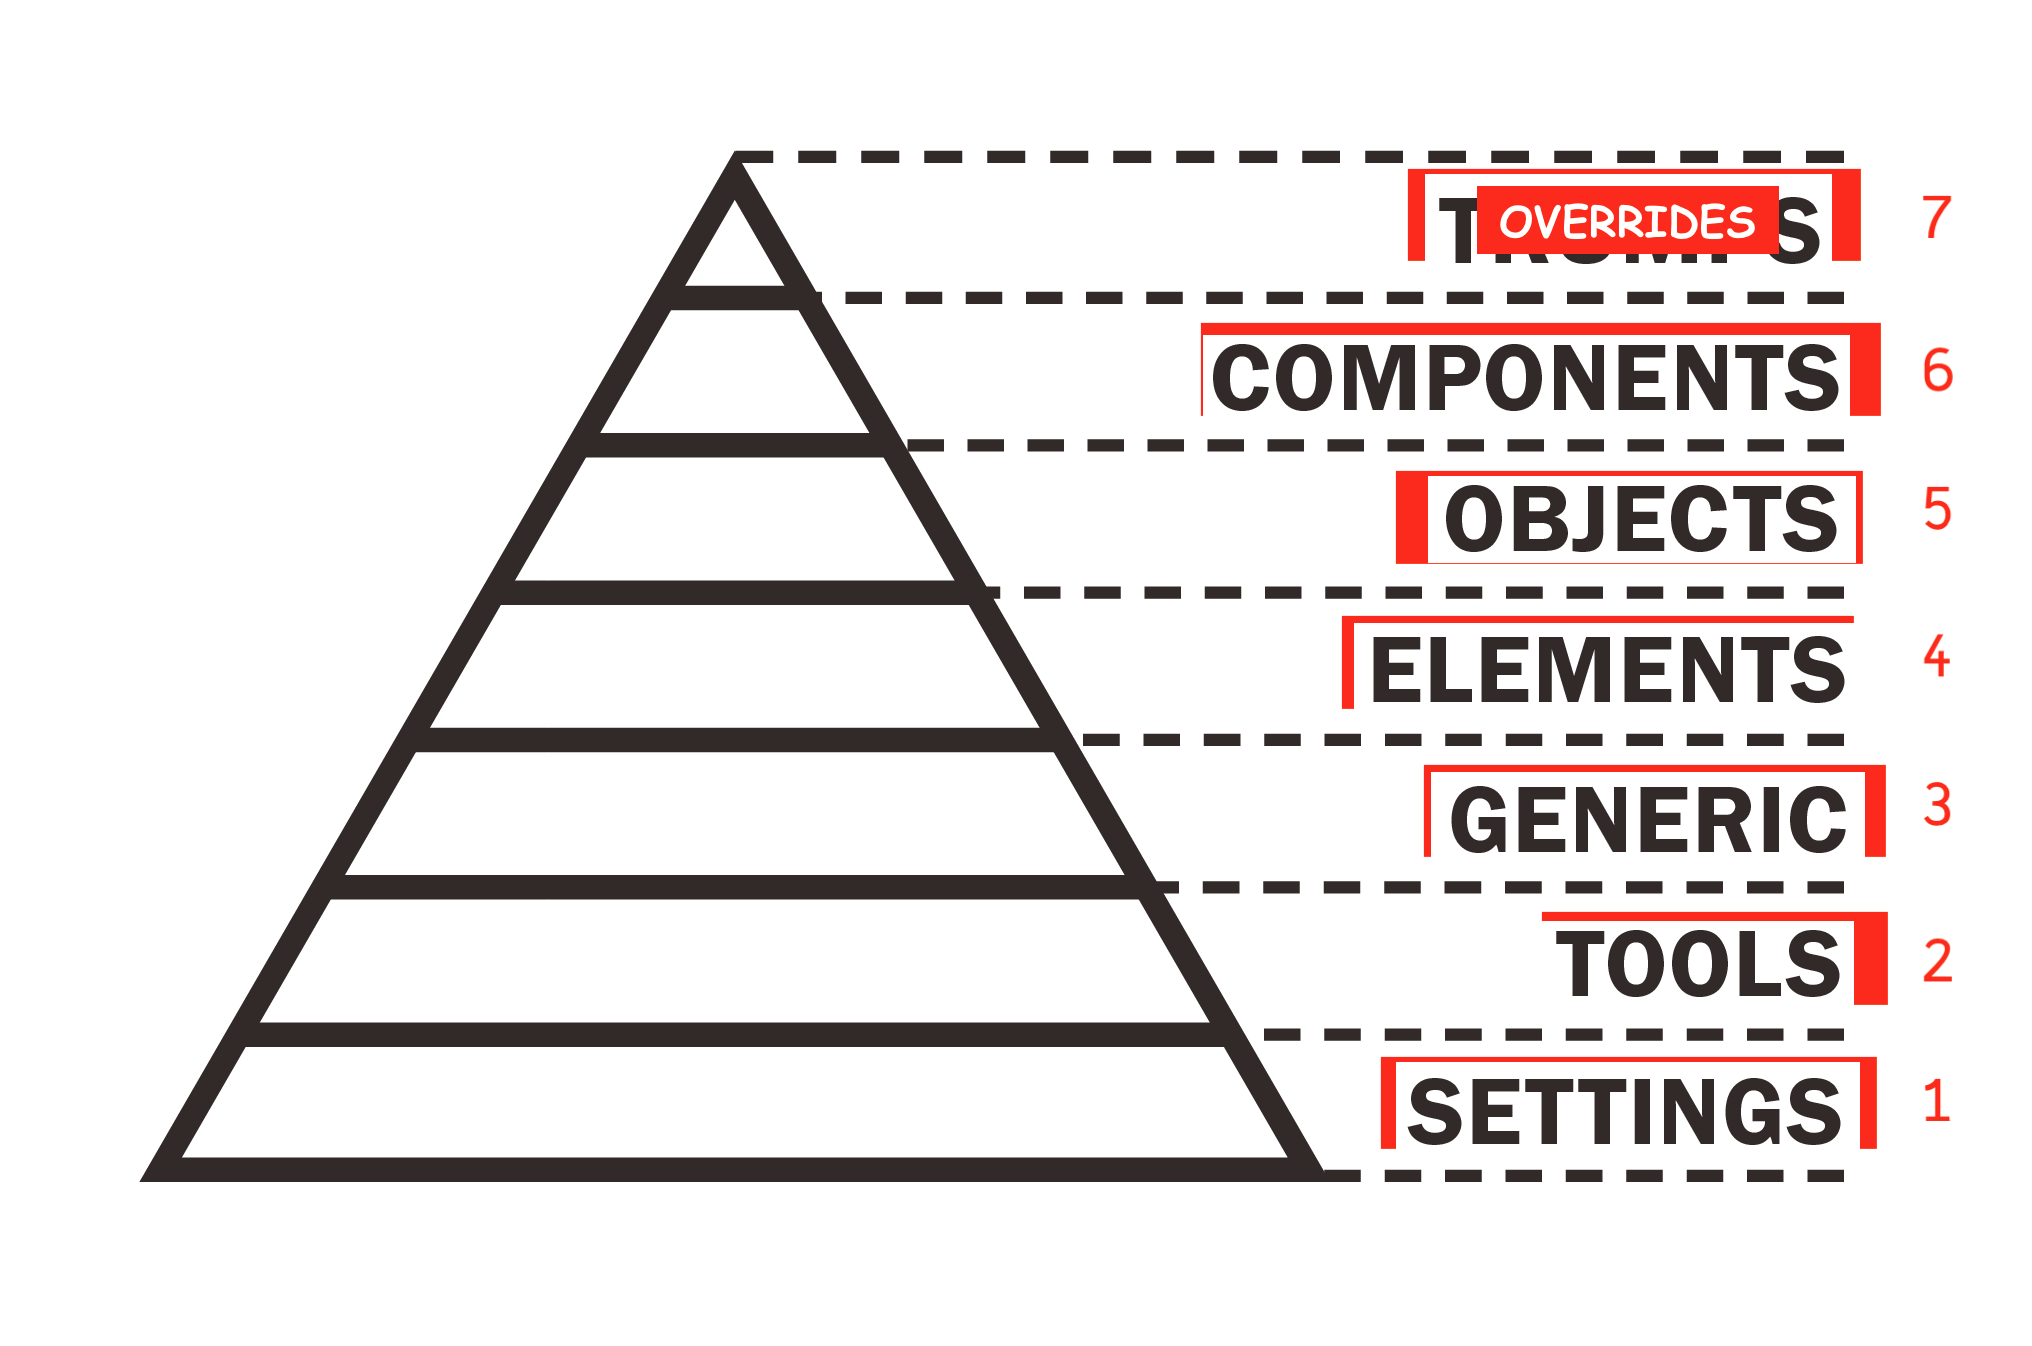 Same triangle flipped vertically,
with all the labels rotated
and numbered 1-7 from bottom to top
